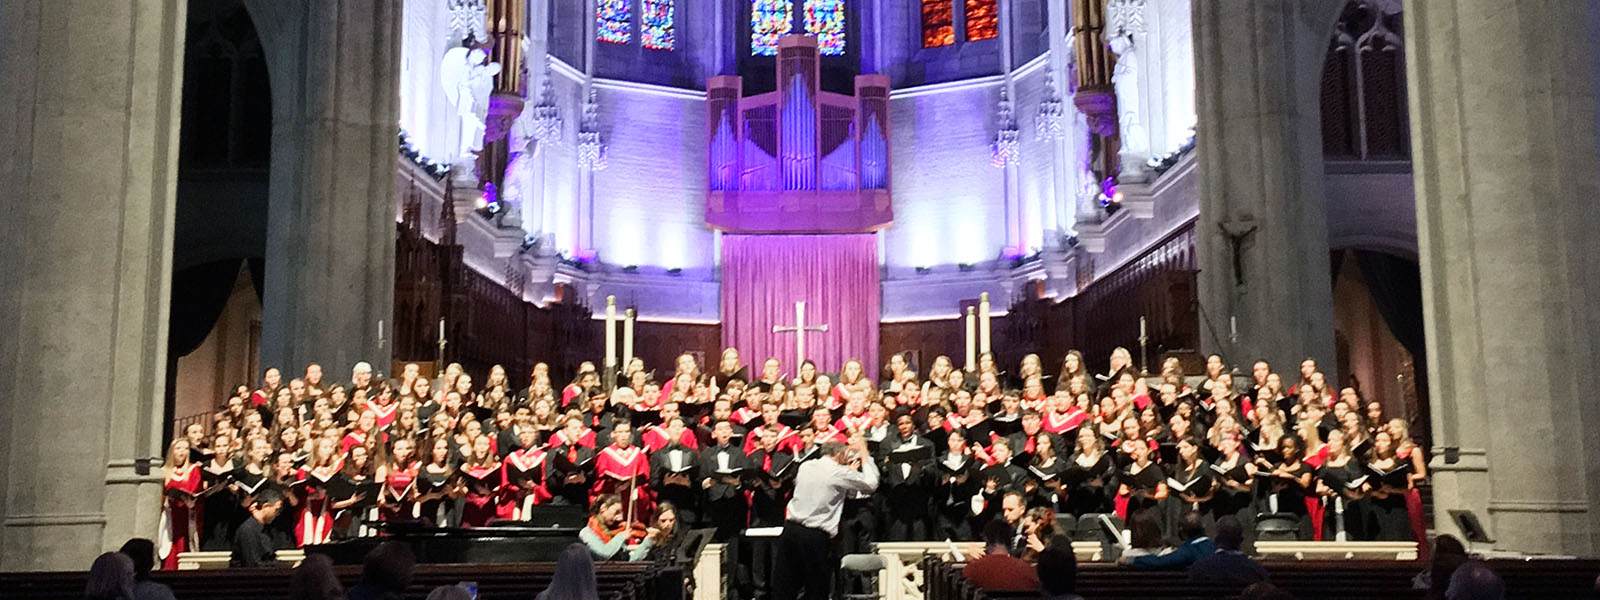 Concert Choir at Grace Cathedral